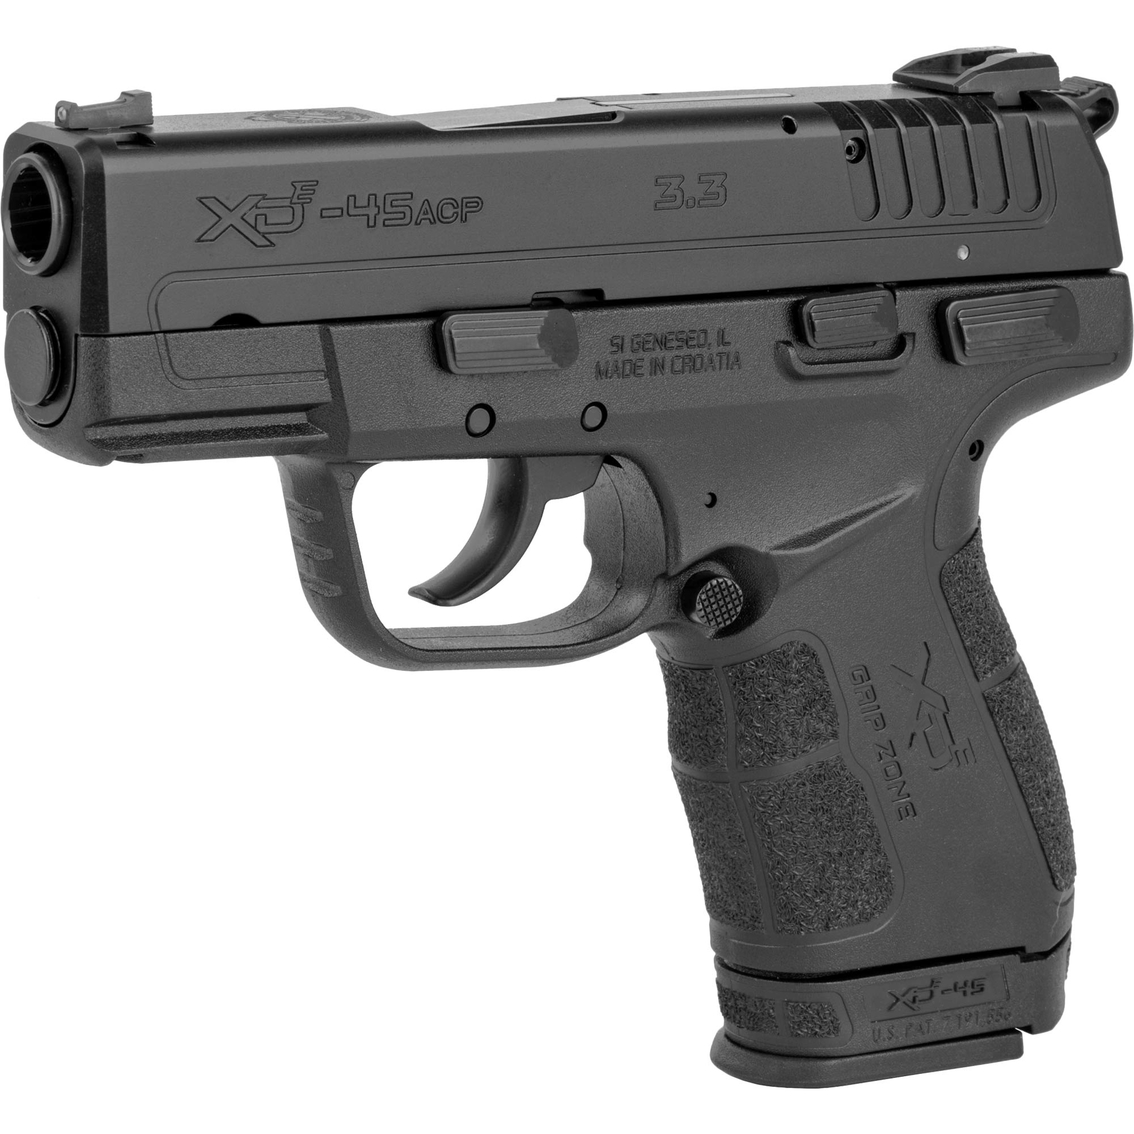 Springfield XDE 45 ACP 3.3 in. Barrel 7 Rds 2-Mags Pistol Black - Image 3 of 3